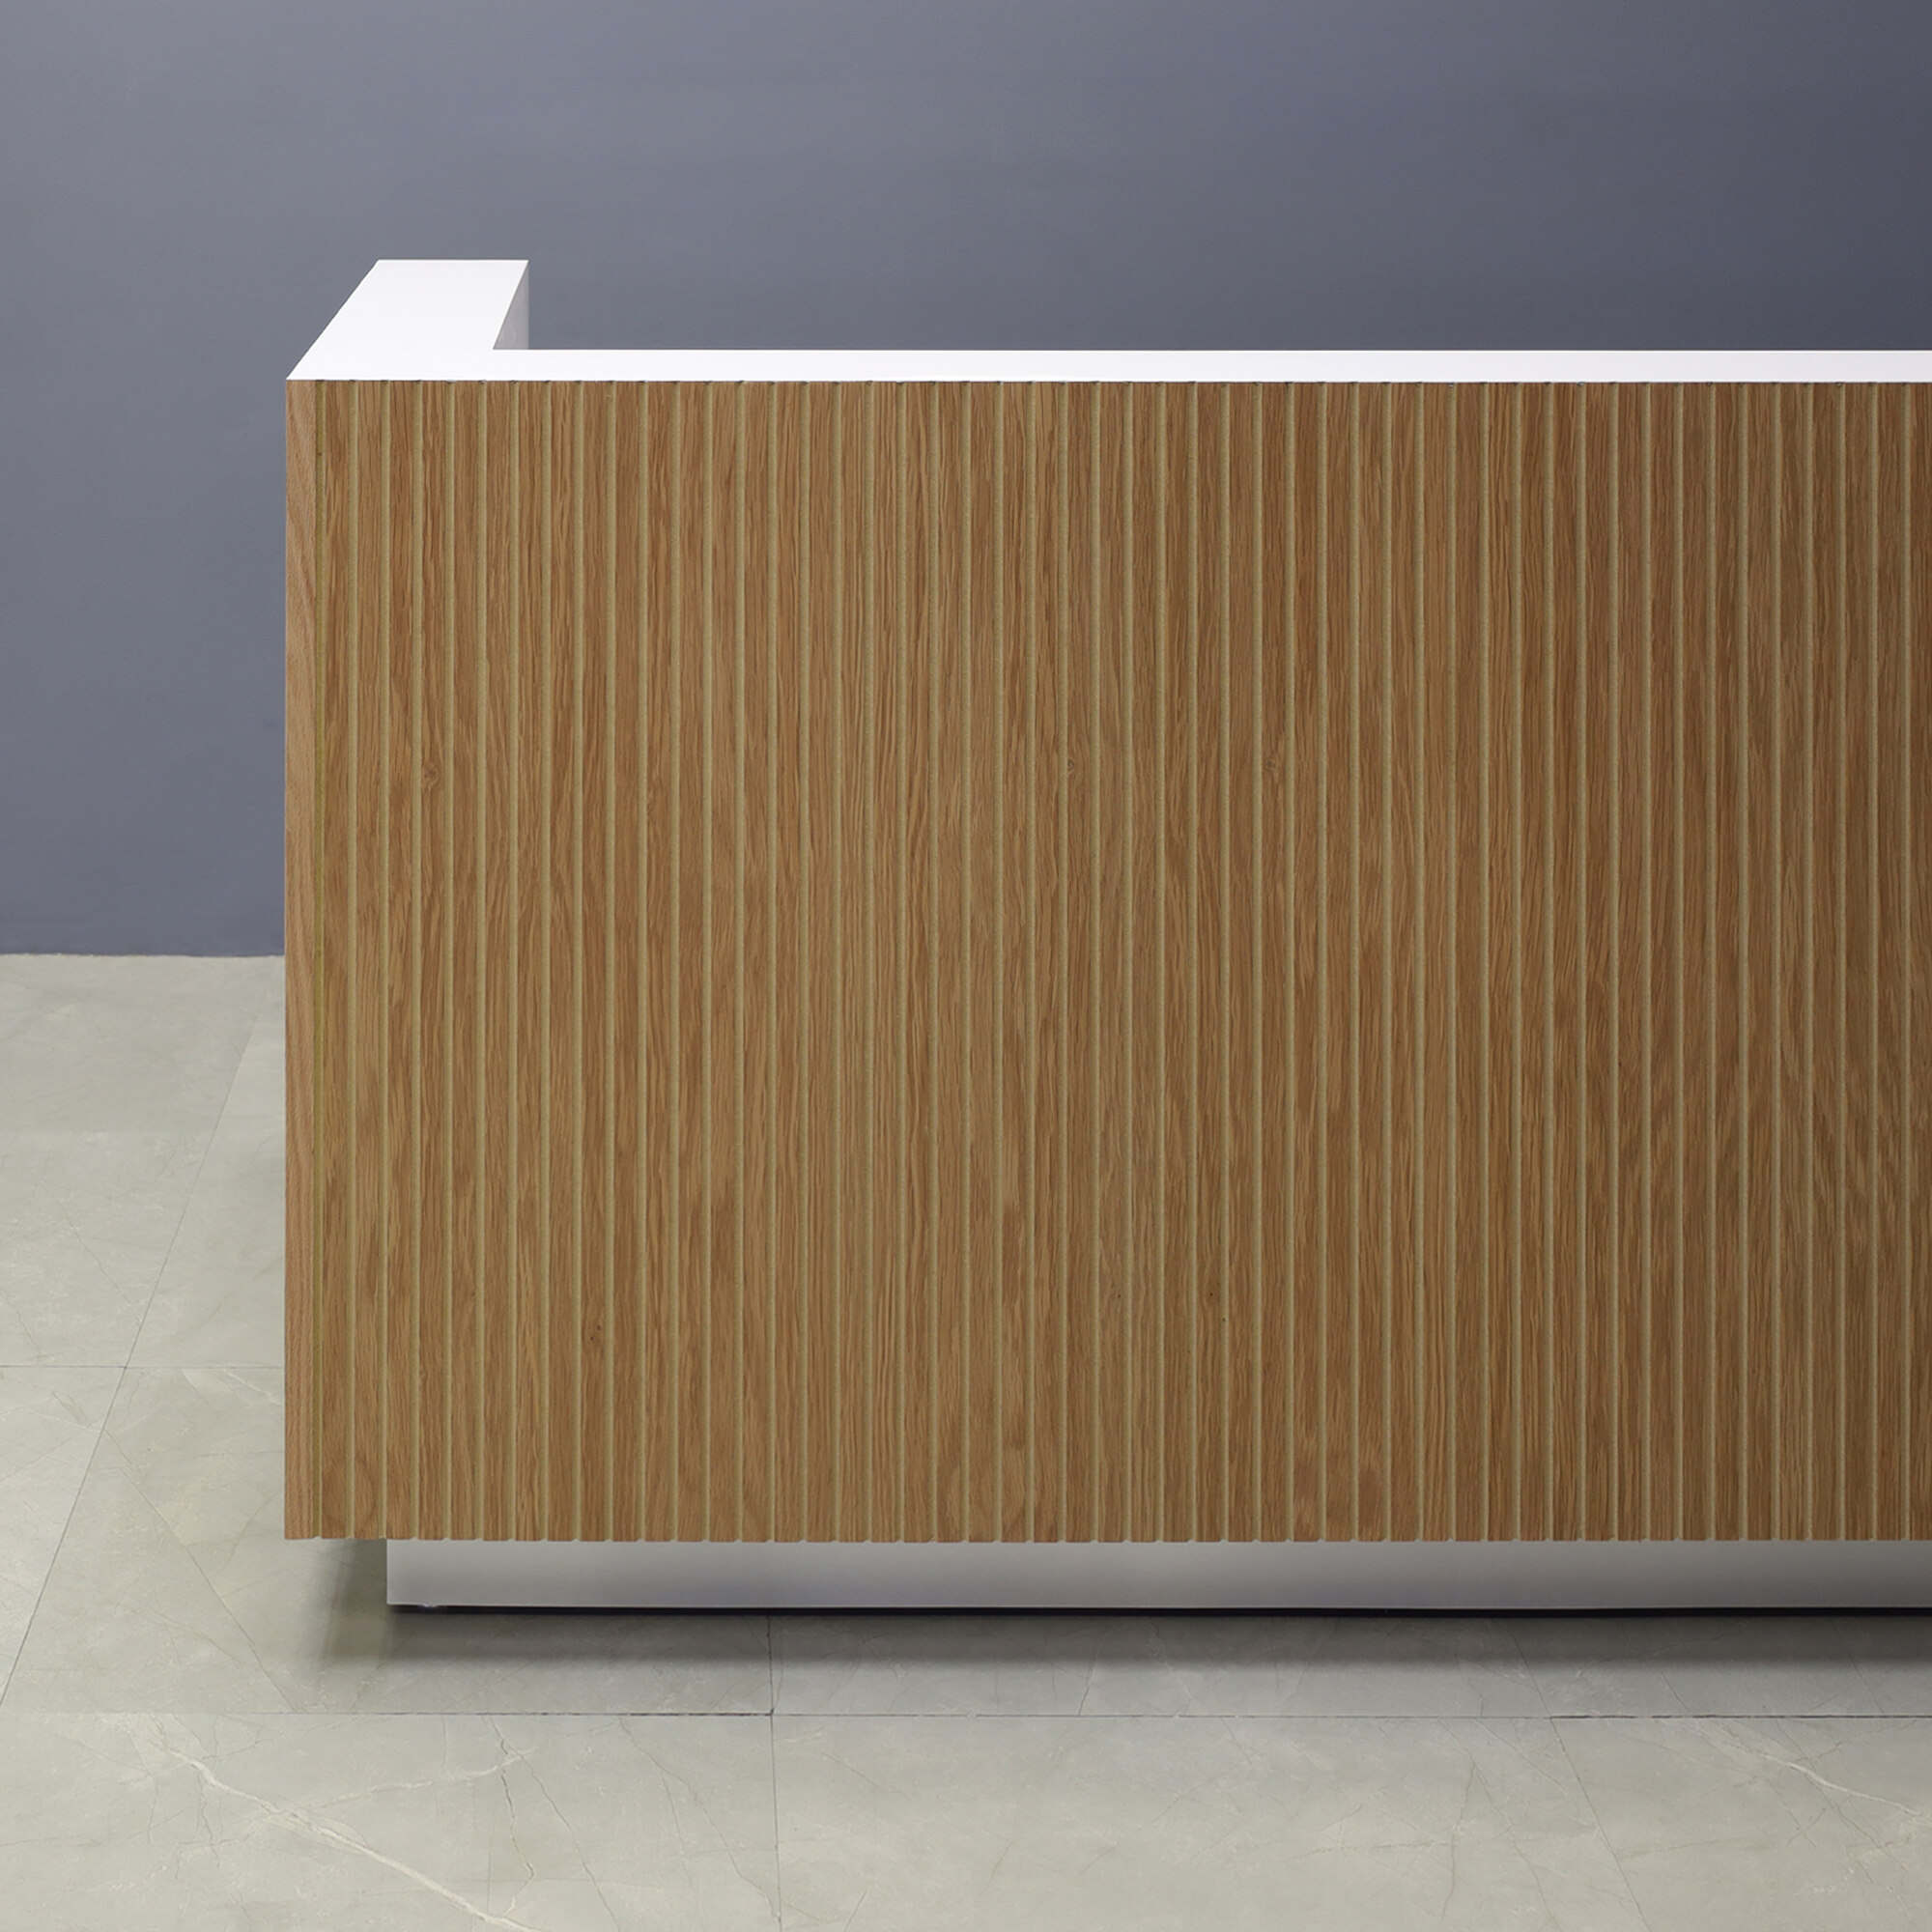 84-inch Dallas L-Shape Custom Reception Desk, left side l-panel when facing front in white oak tambour main desk, and white matte laminate workspace, with brushed aluminum toe-kick, shown here.